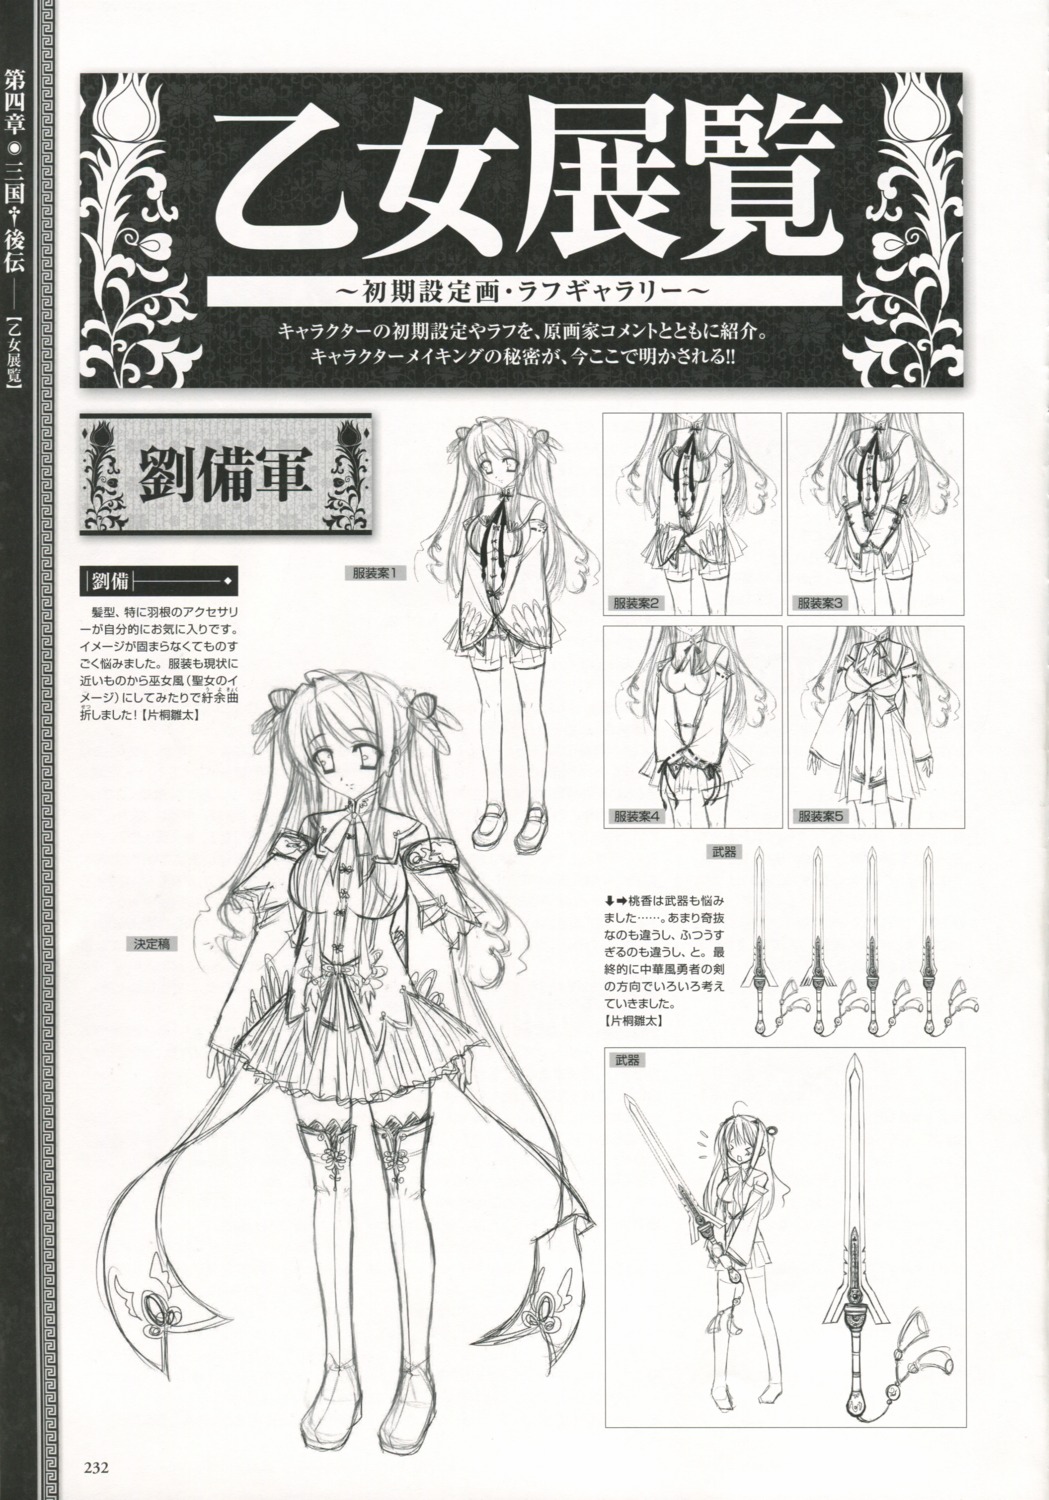 baseson character_design koihime_musou monochrome ryuubi sketch sword thighhighs